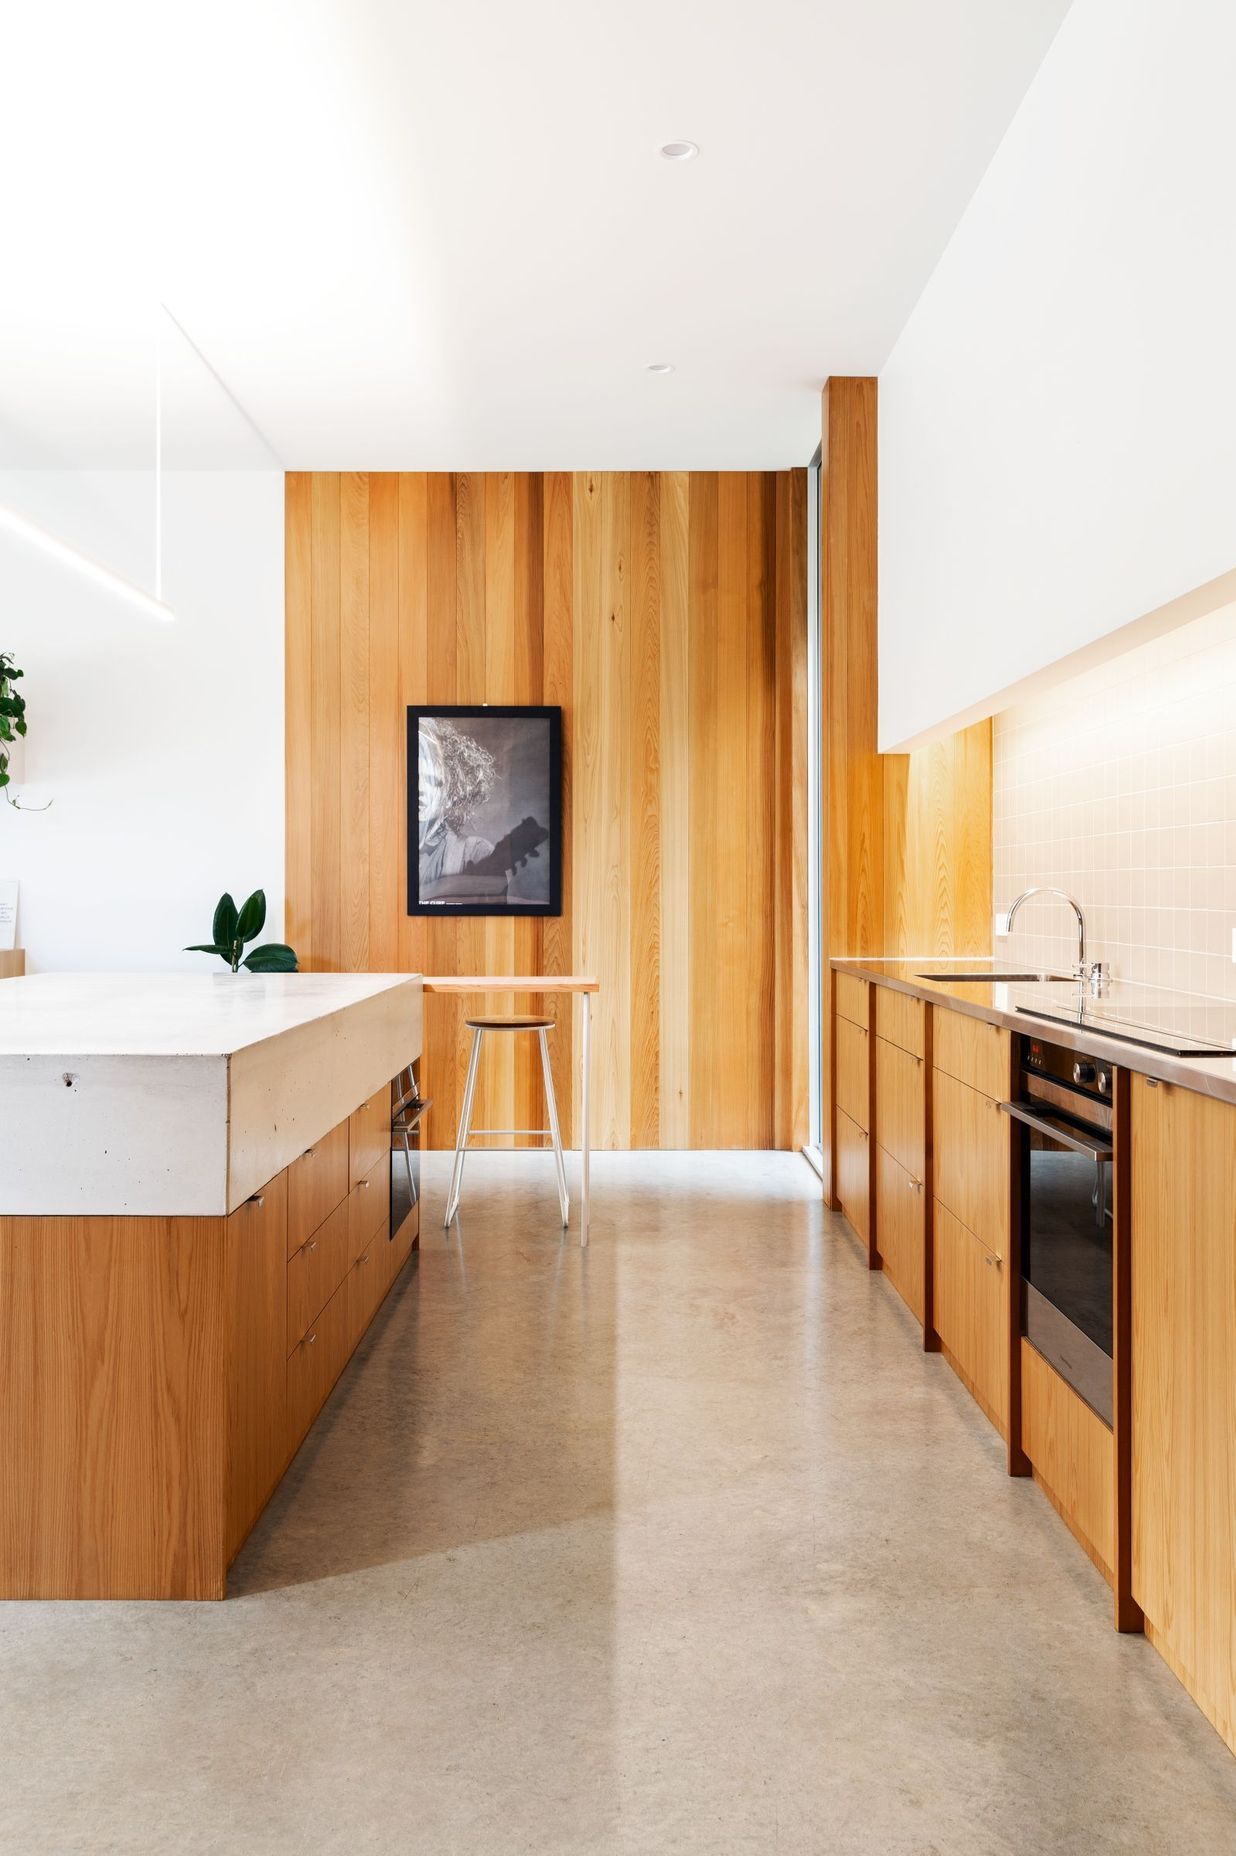 Concrete flooring and timber elements create a restrained palette in the kitchen.